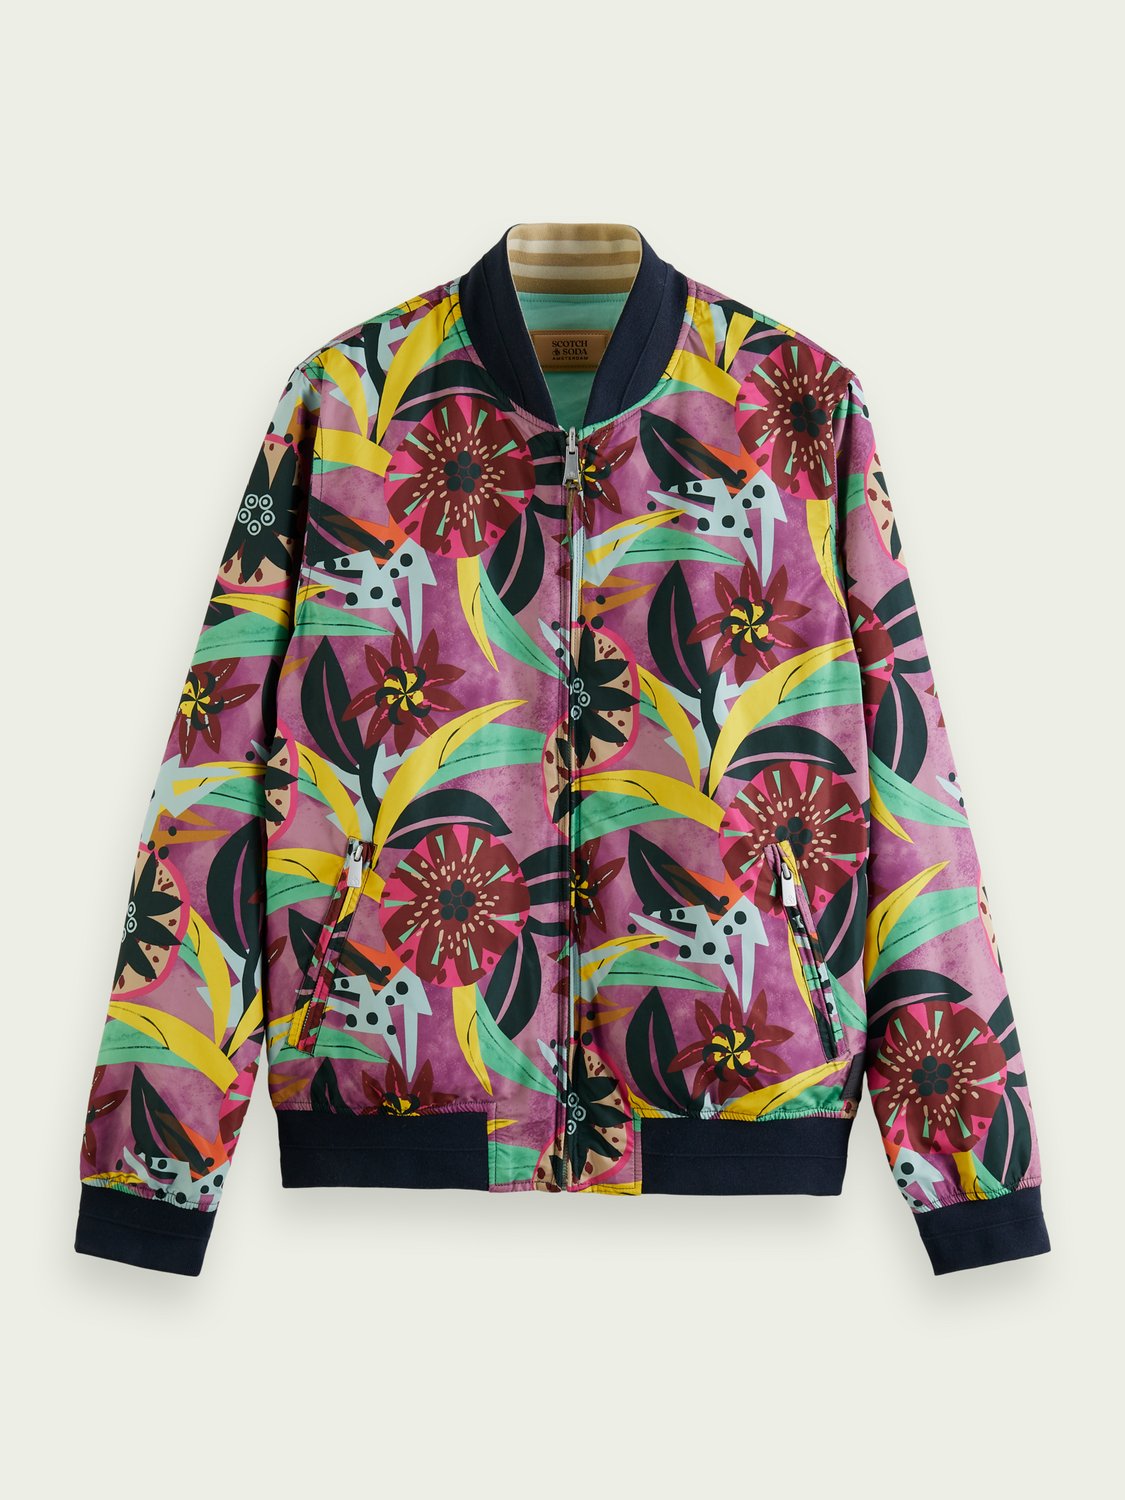 Scotch and Soda | Printed reversible bomber jacket in Combo A | Scotch ...